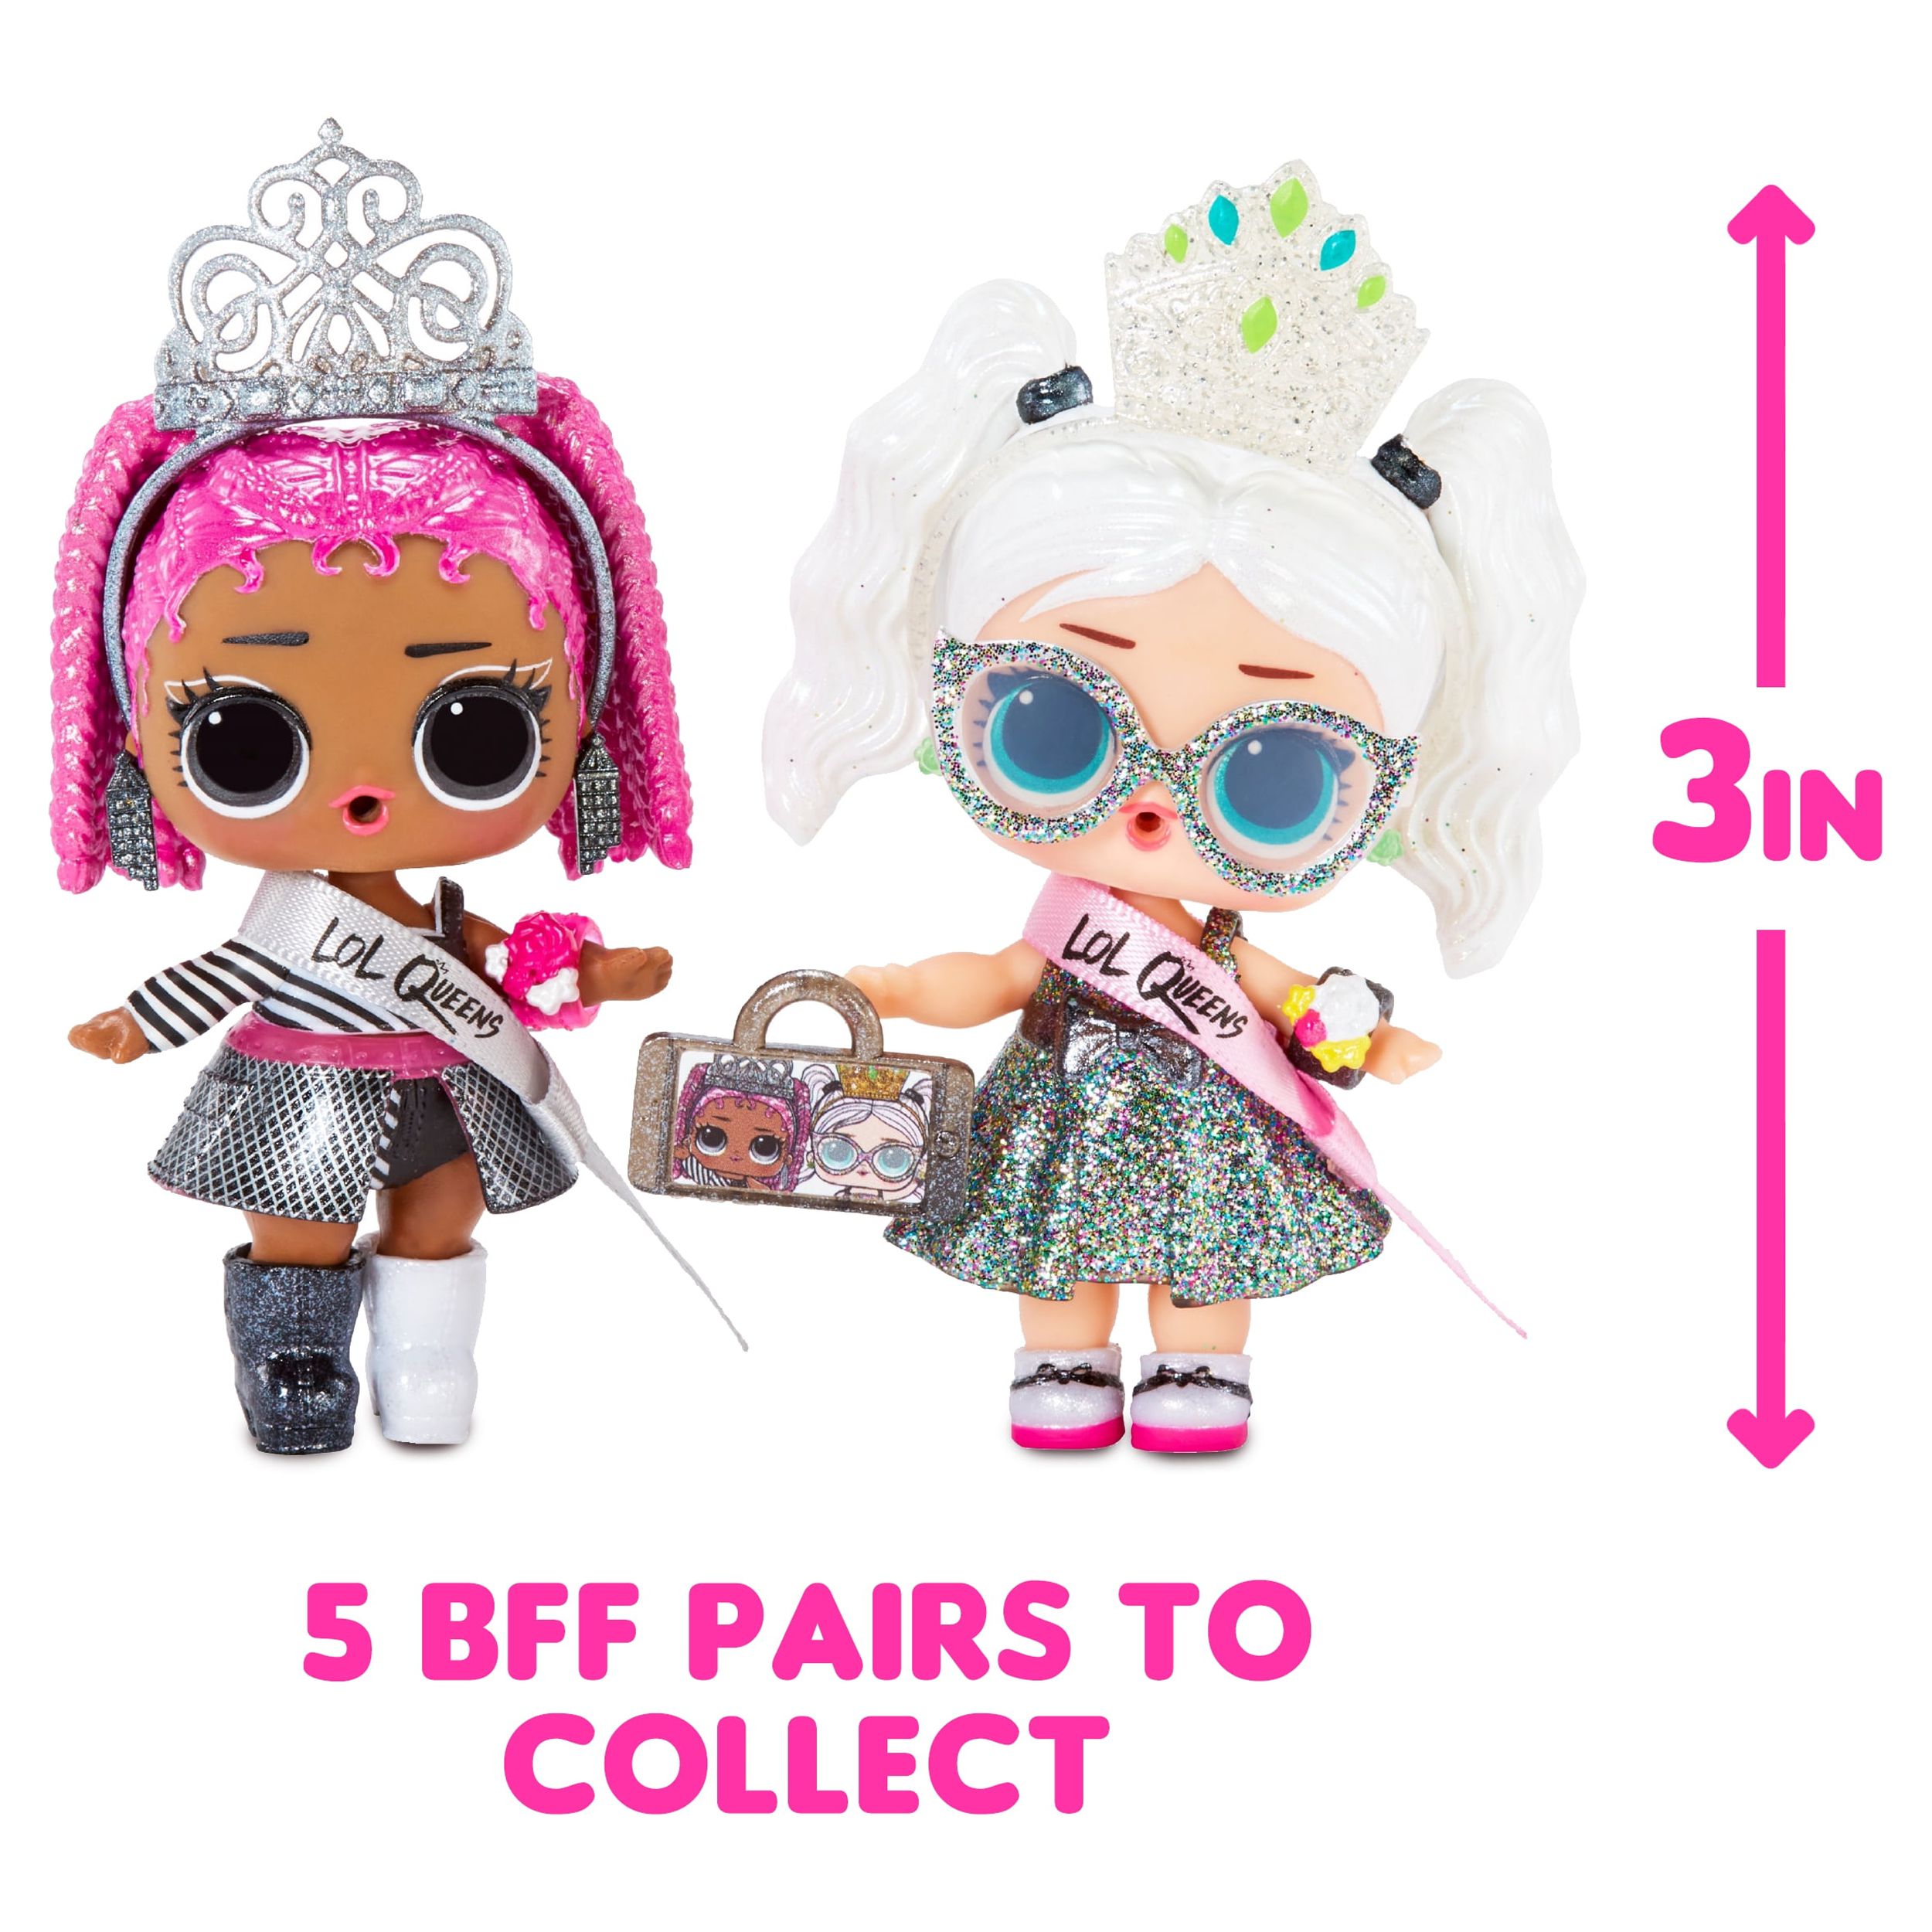 lol surprise queens dolls with 9 surprises including doll, fashions, and royal themed accessories - great gift for girls age 4+ - image 5 of 7